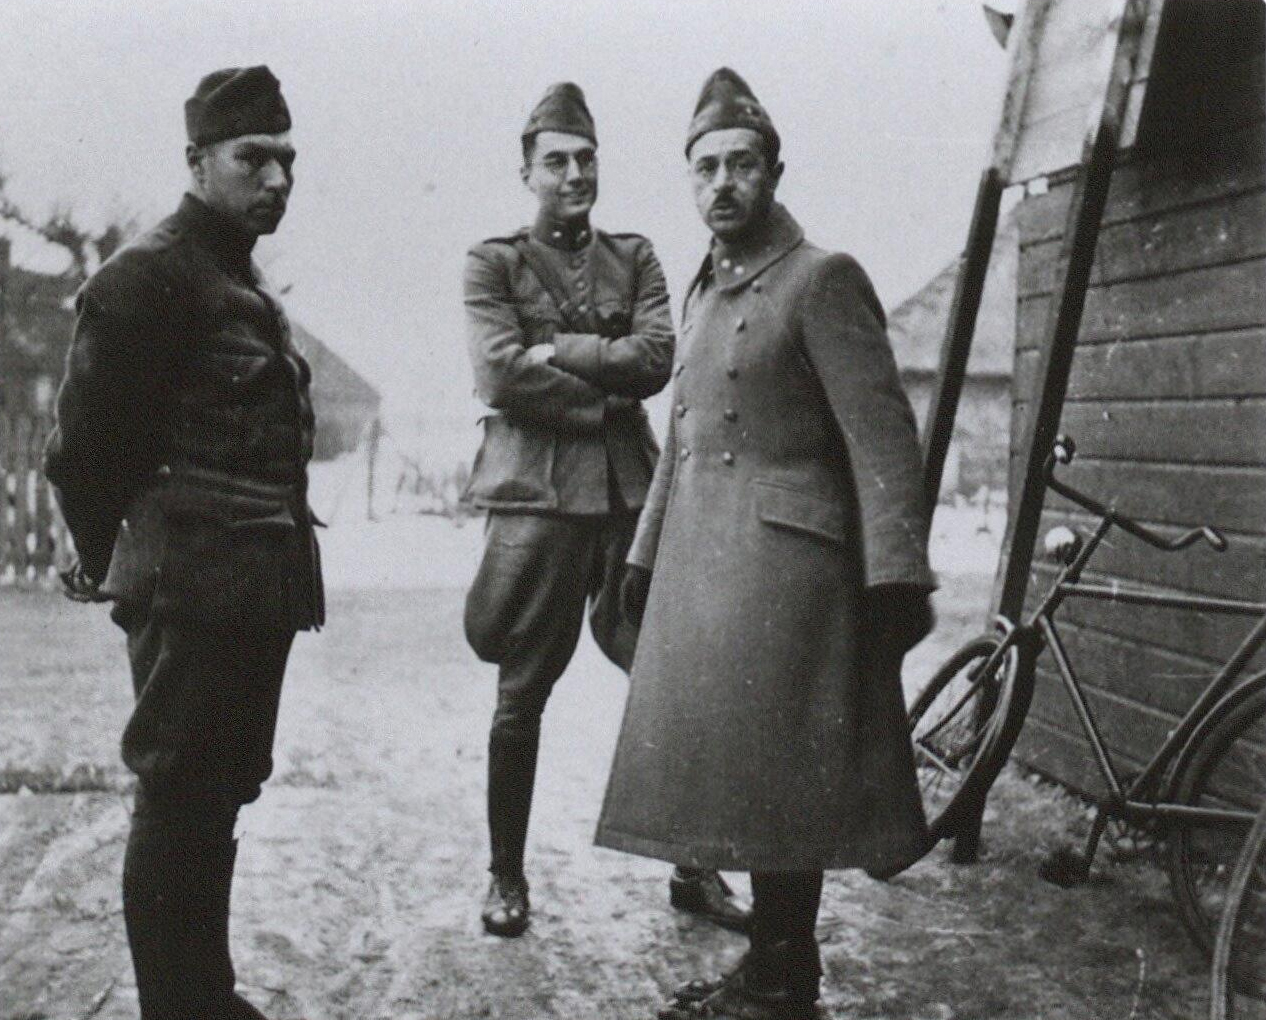 Officers of the 3rd (bicycle) Company, Lt Zouteriks on the right
